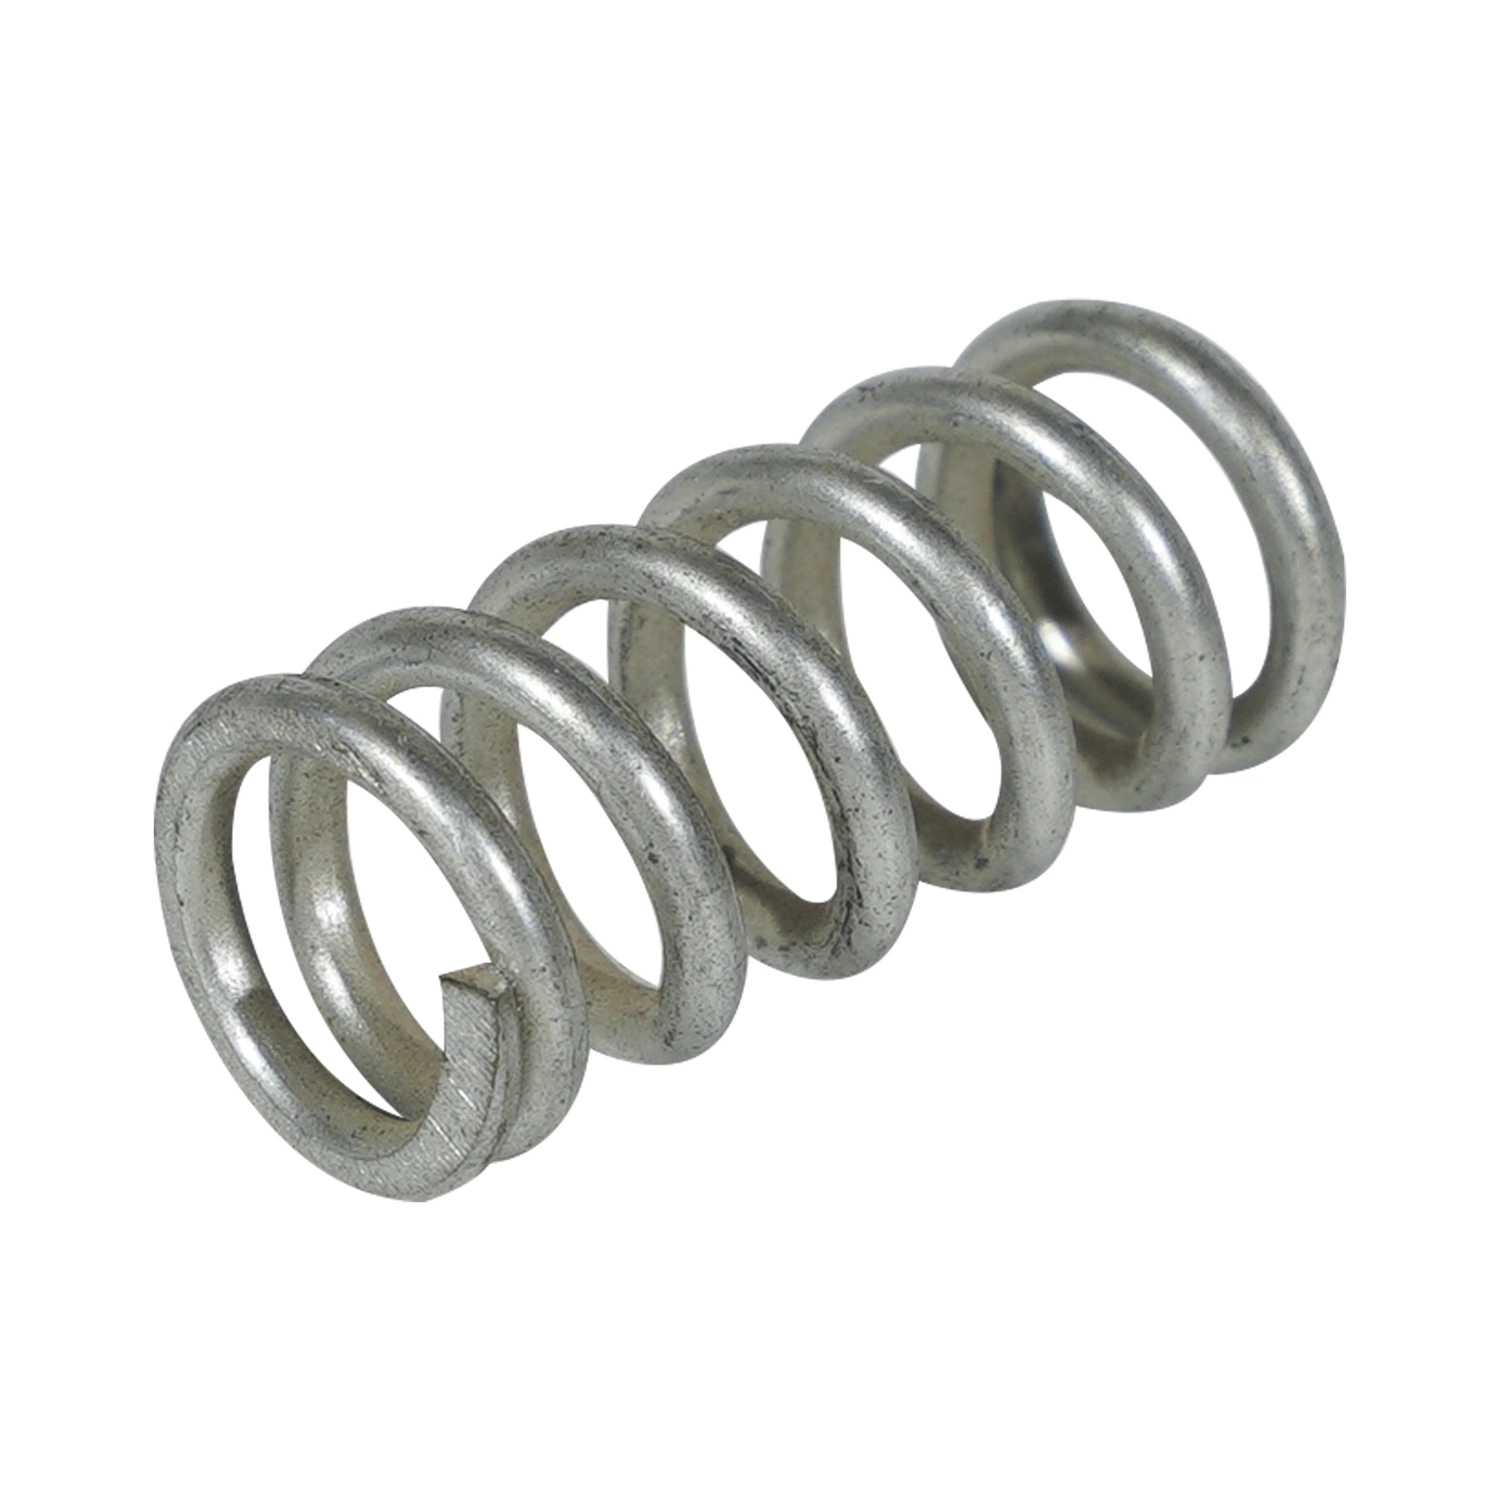 Custom Iron Metal Spring Steel Carbon Steel Duty Compression Coil Springs for Bicycle